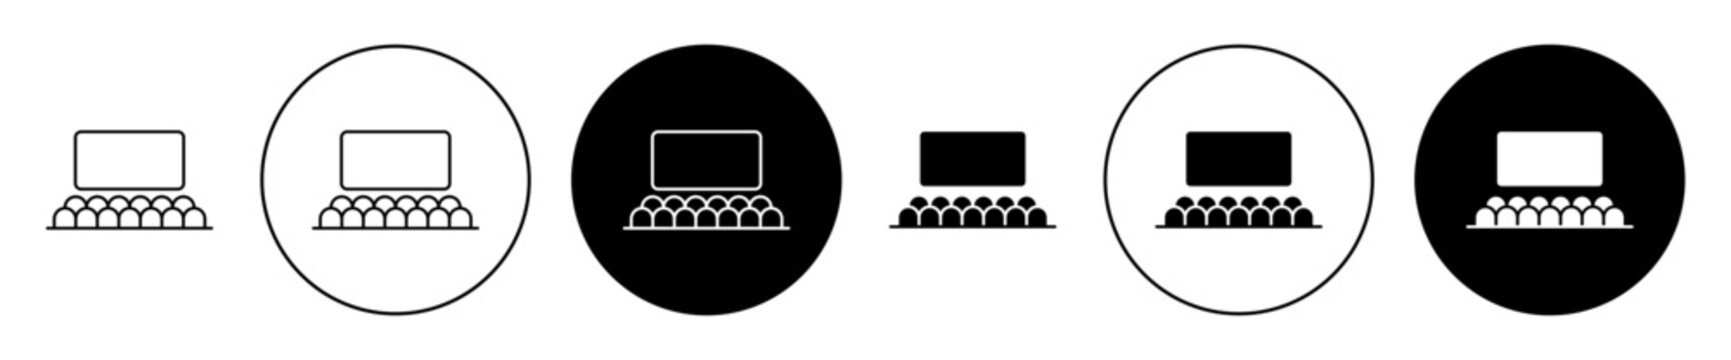 cinema hall icon set in black filled and outlined style. suitable for UI designs